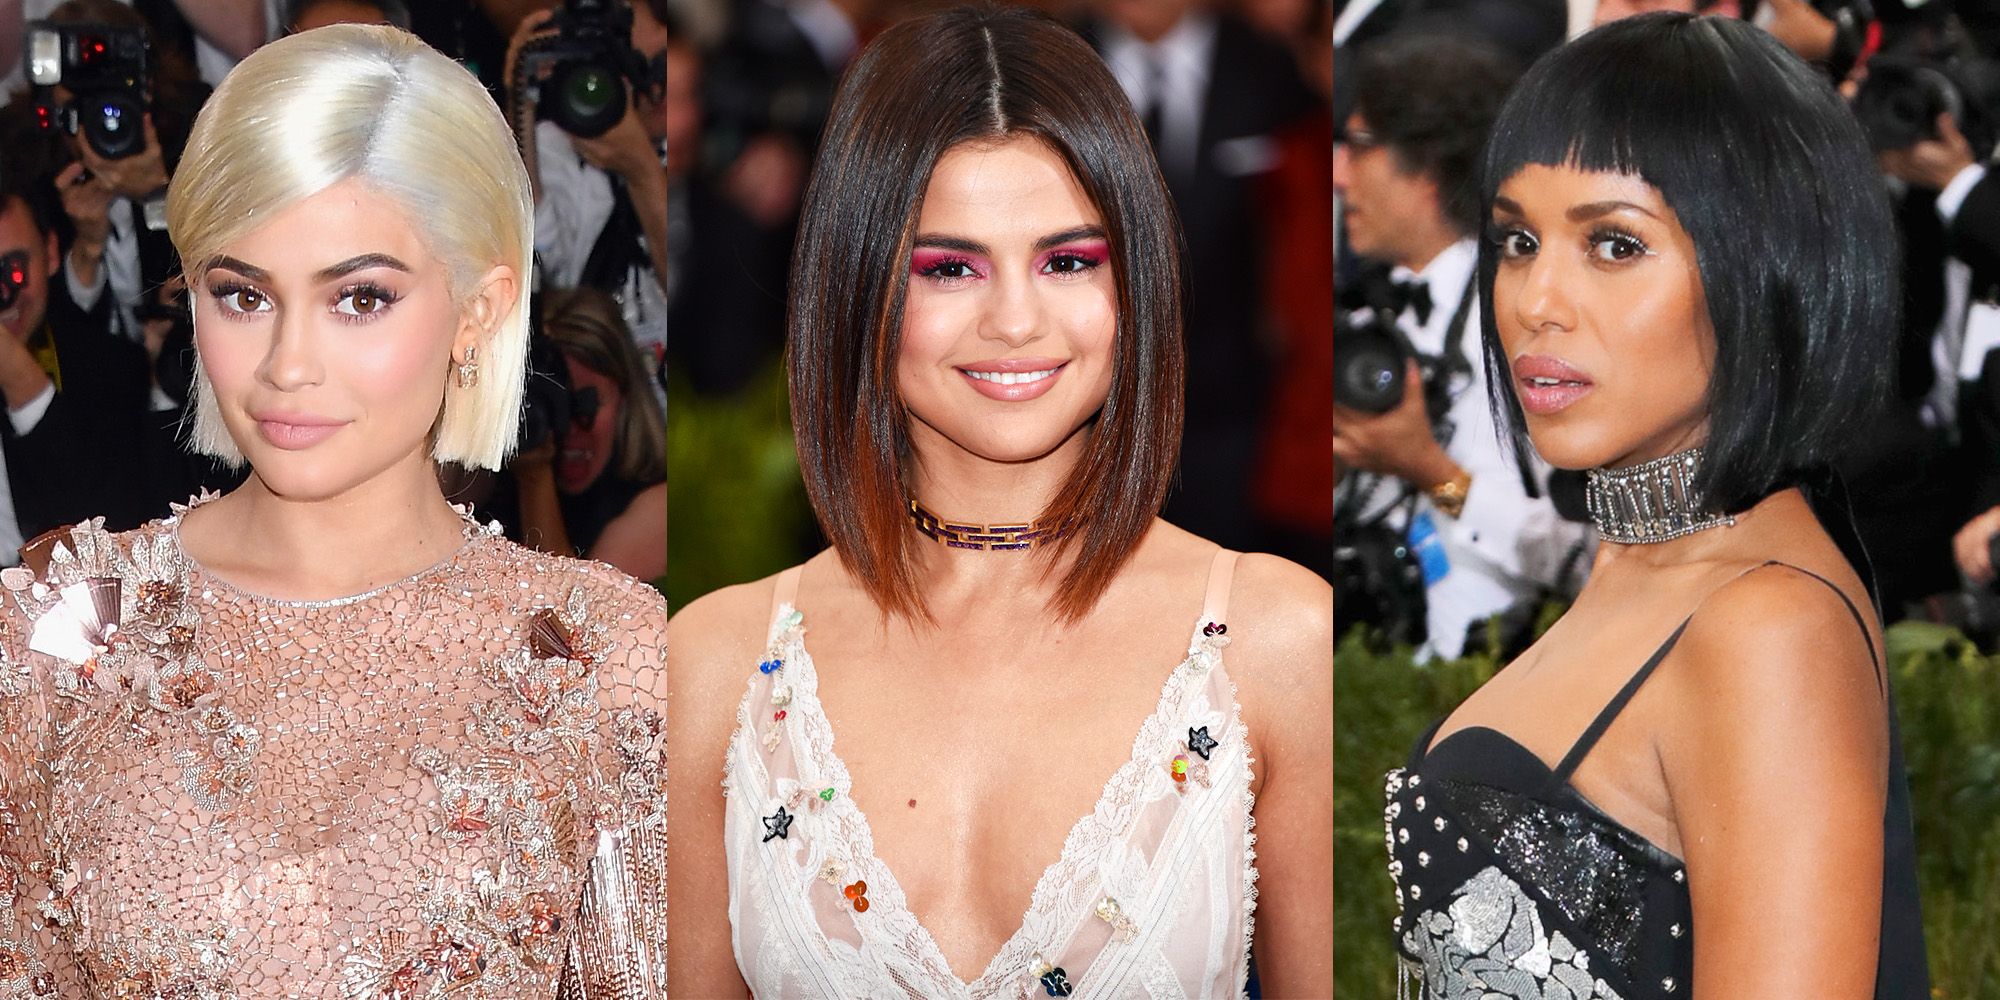 Met Gala 2017: 5 Beauty Trends That Ruled the Red Carpet